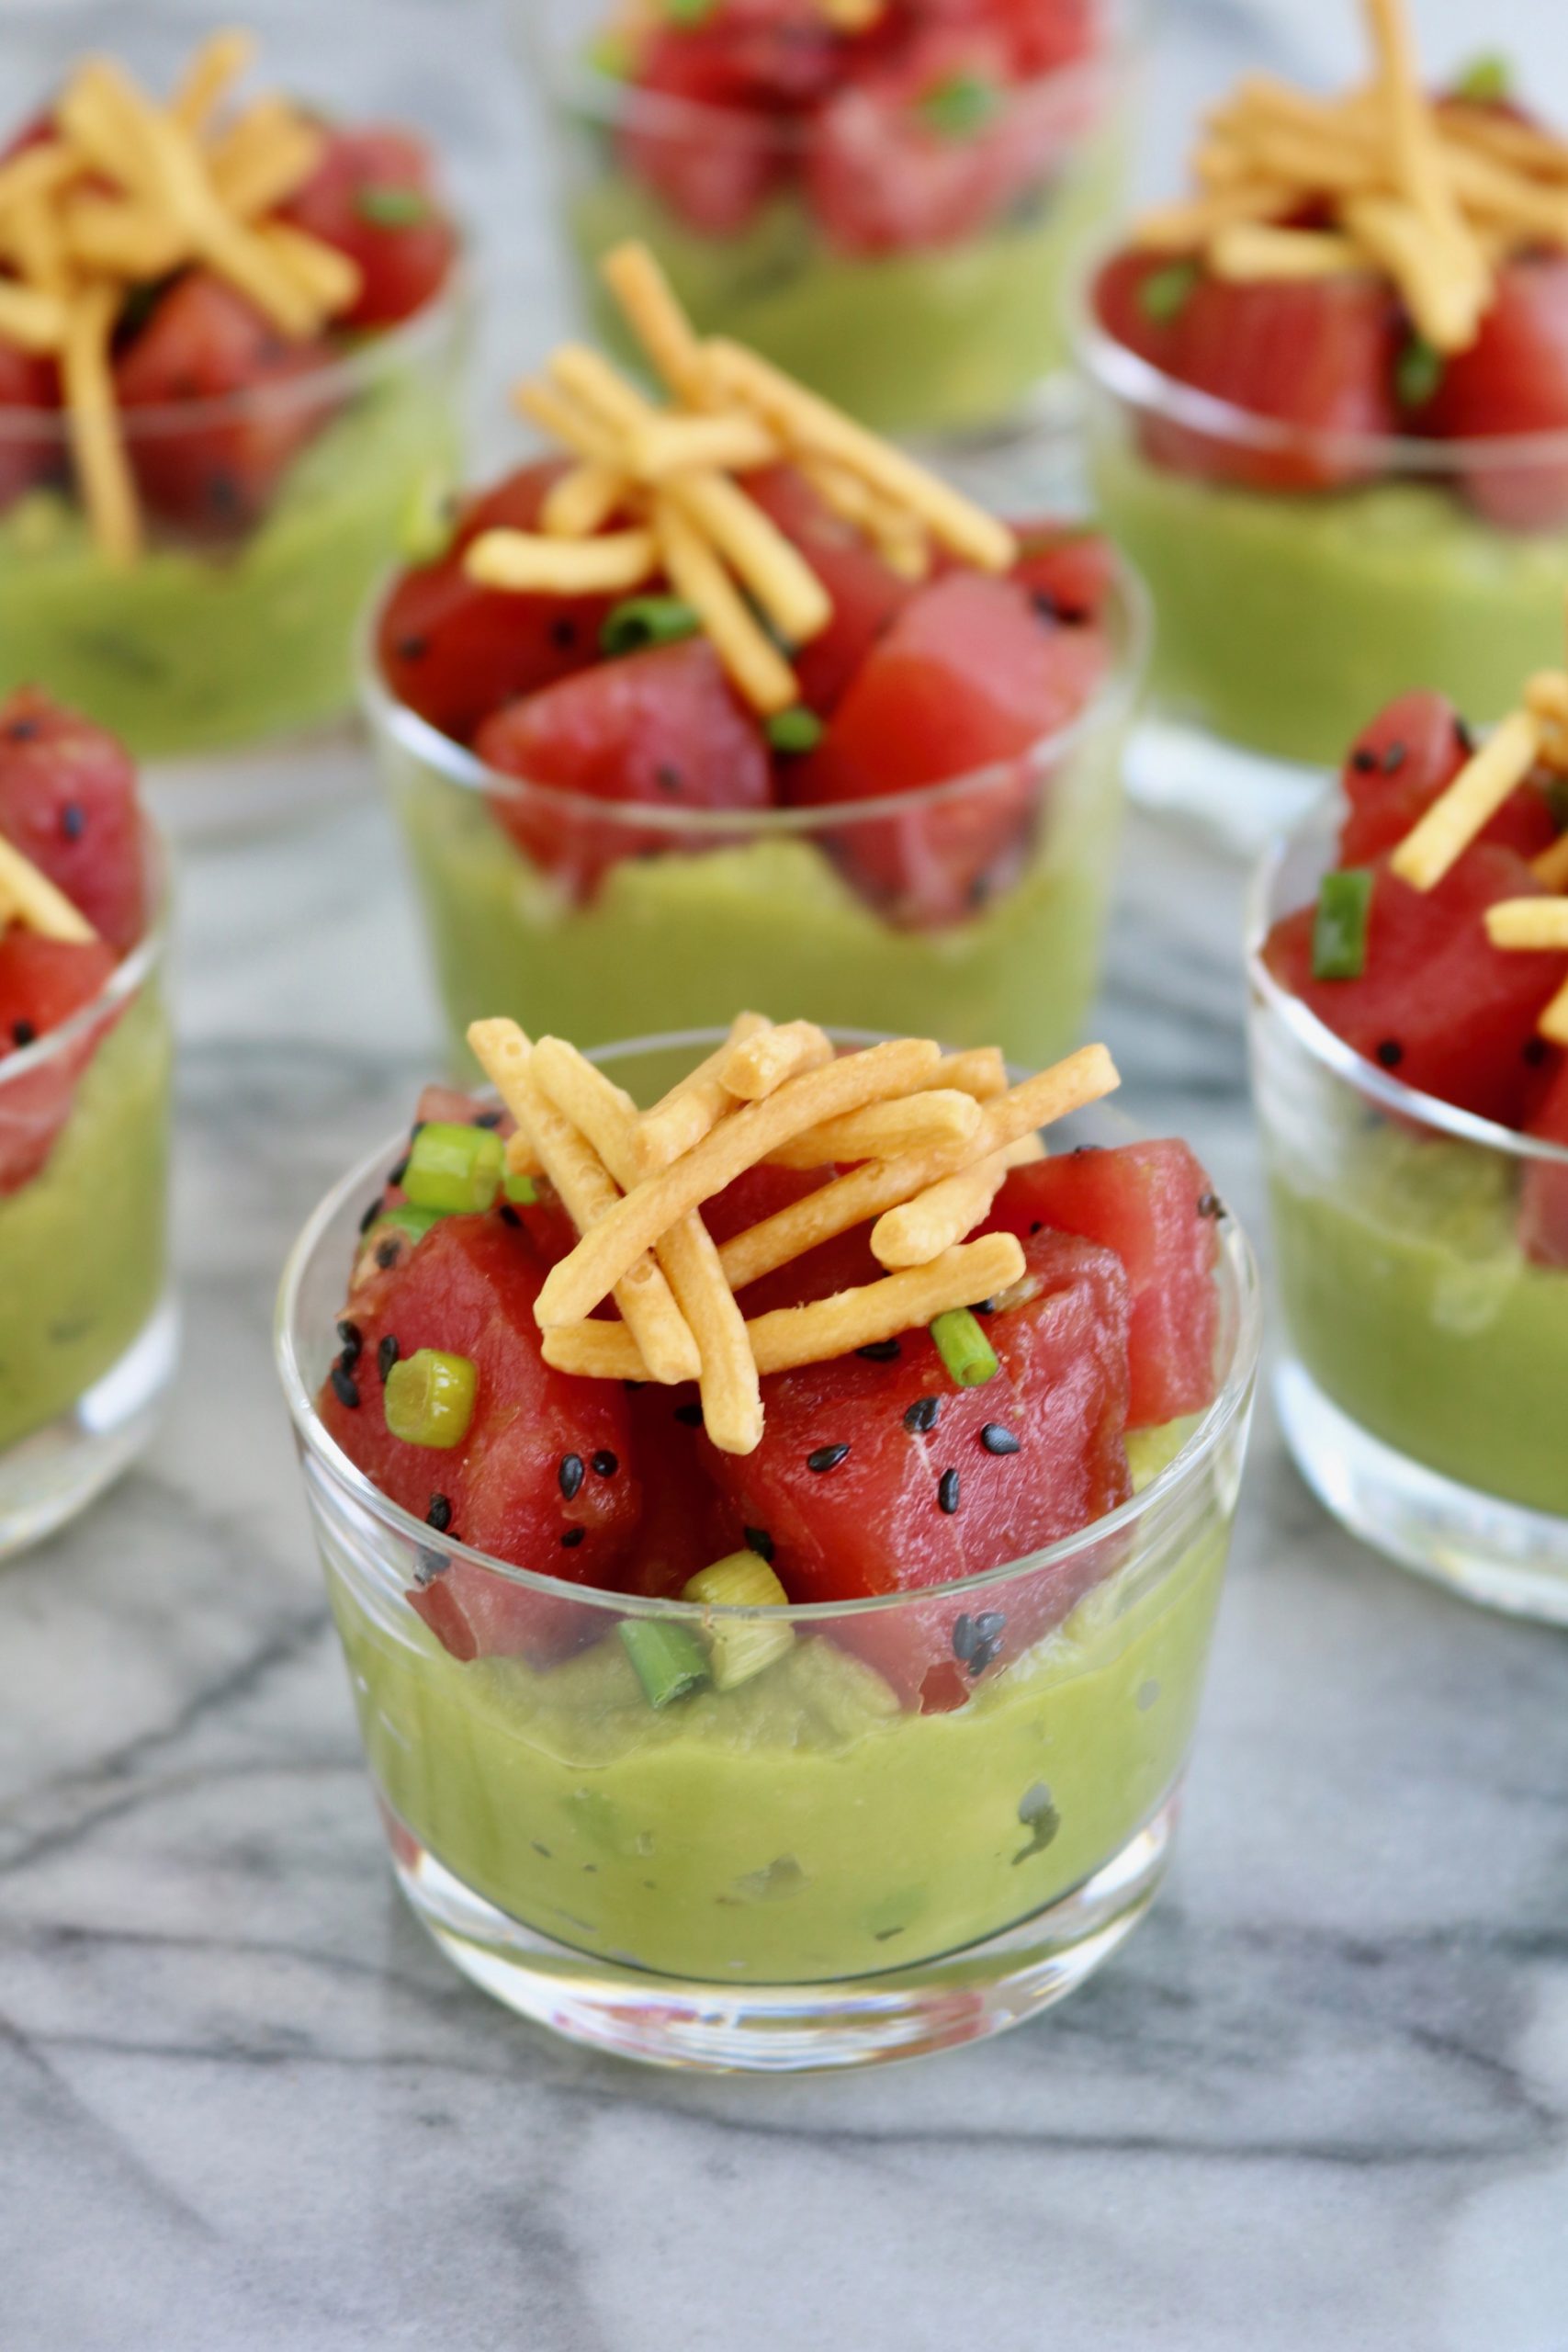 Megamex foods ahi tuna with guacamole in a cup